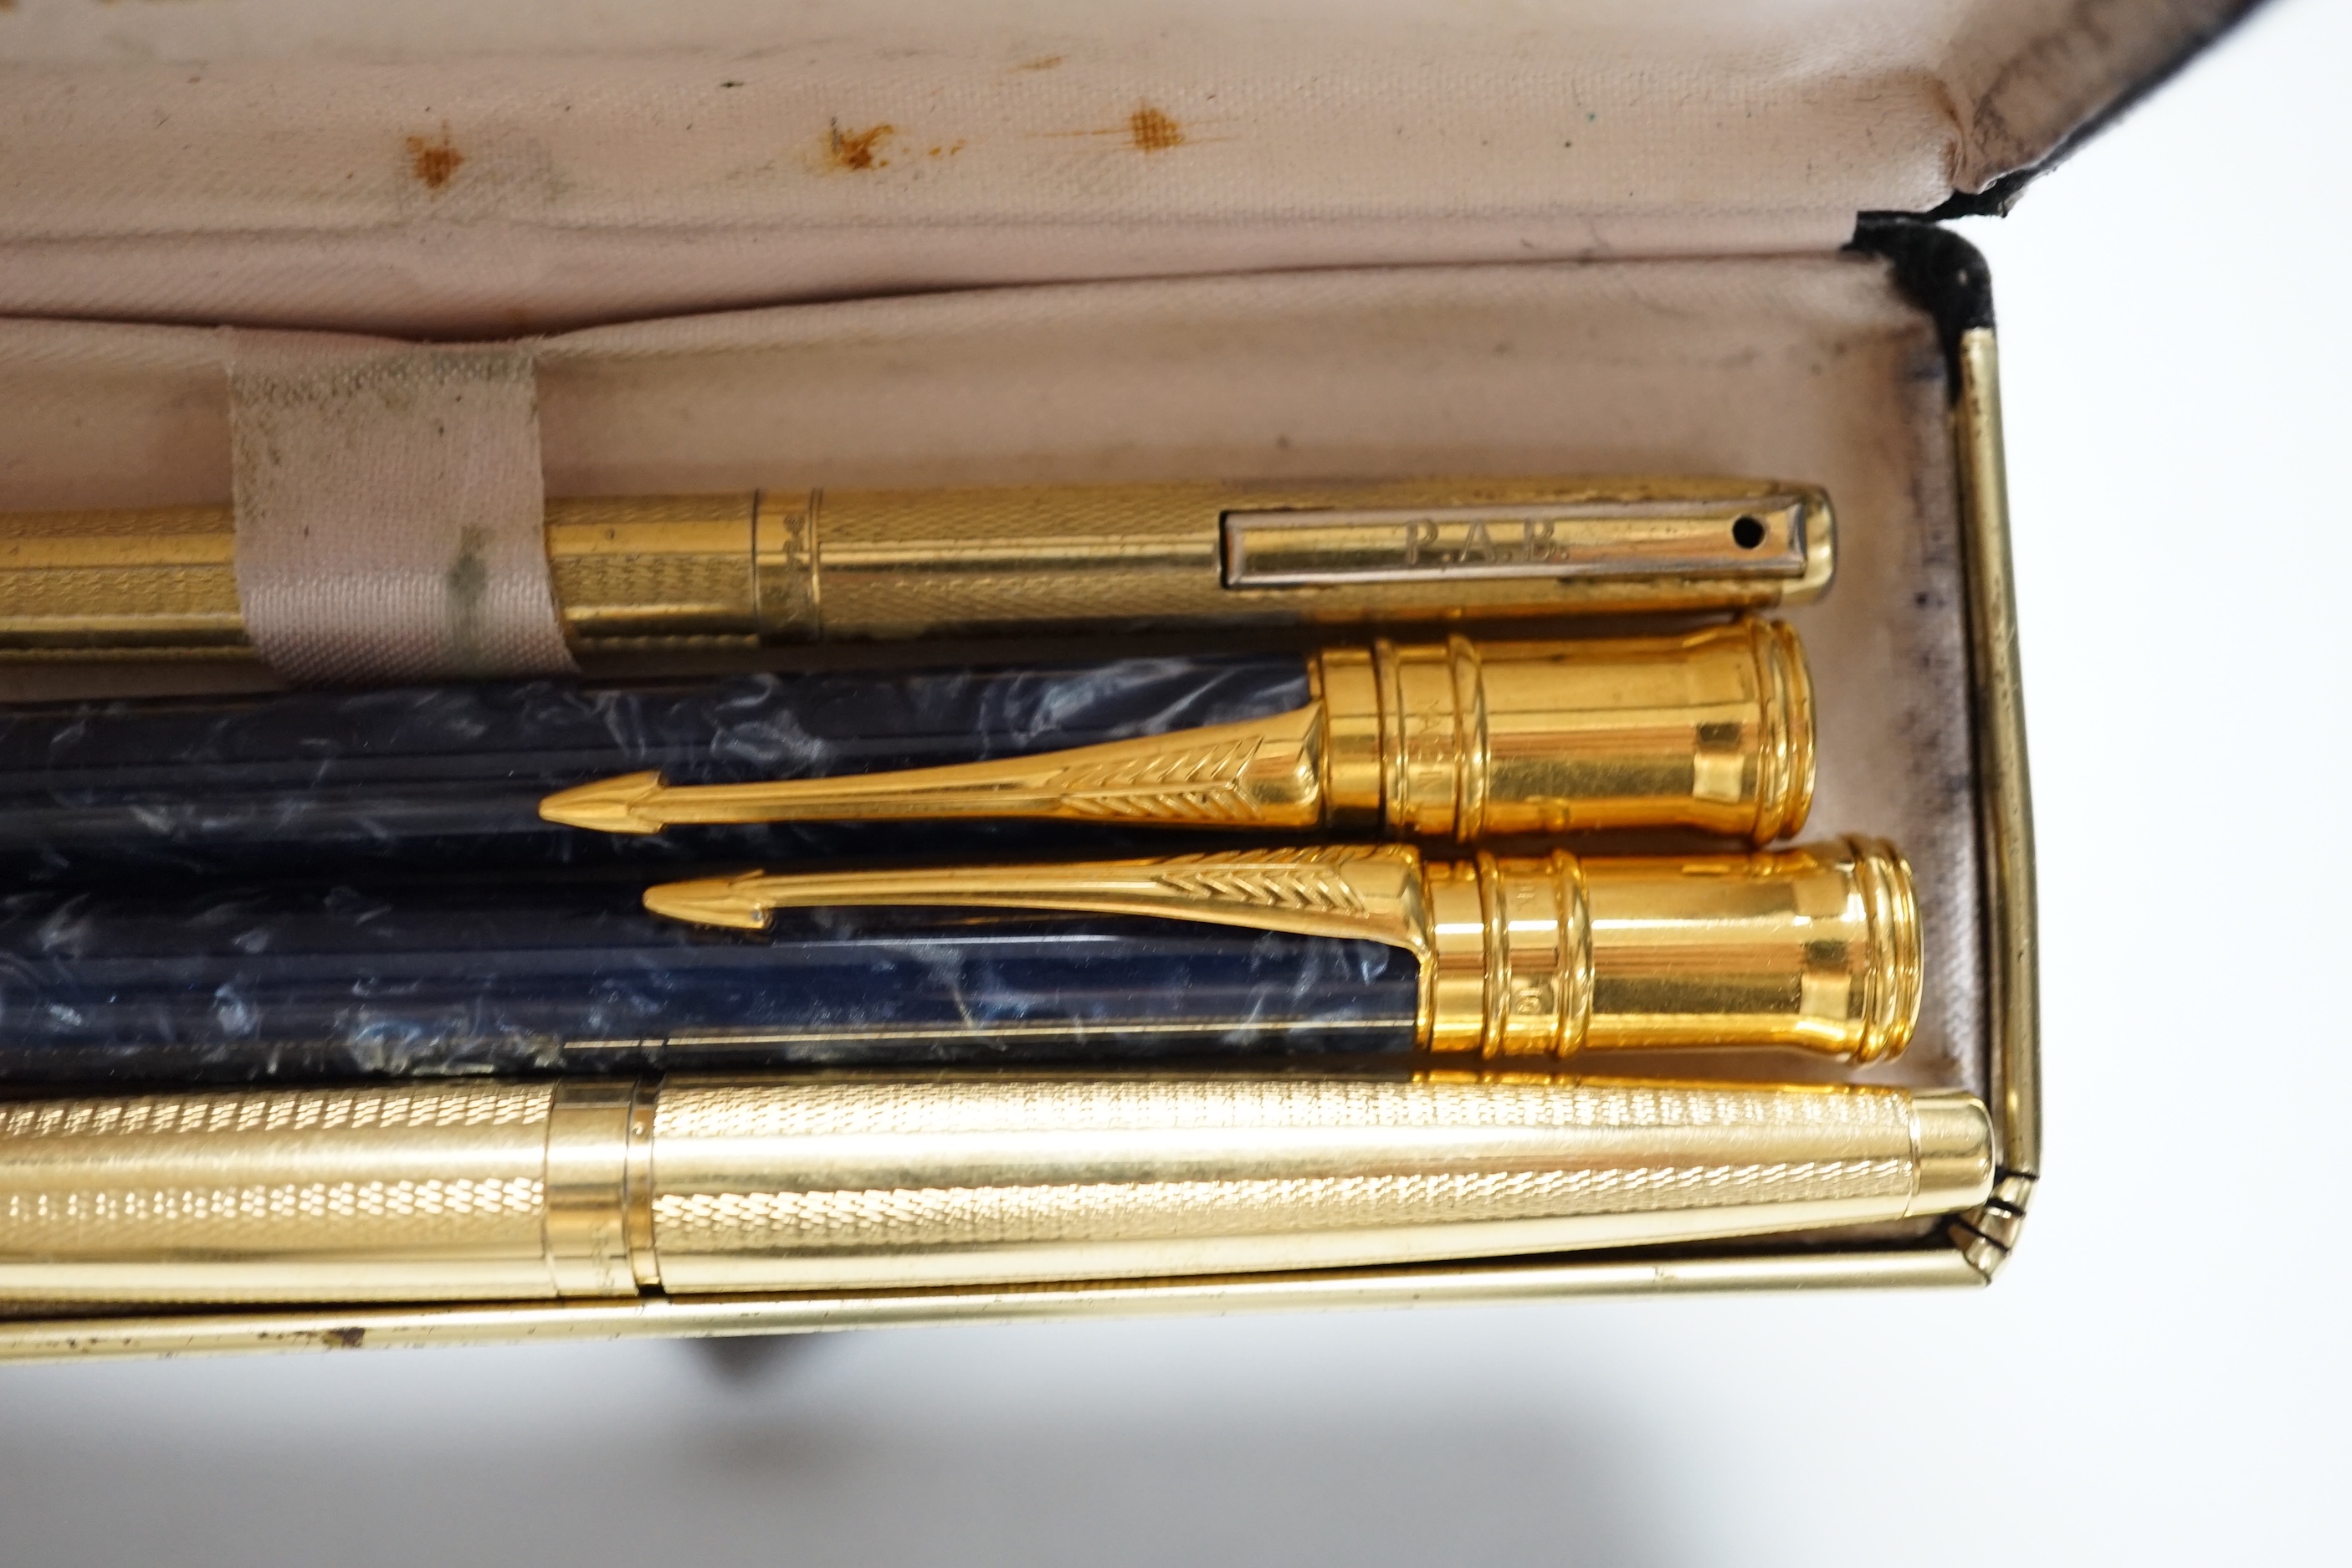 A Sheaffer fountain pen, a Parker pen and pencil pair, one other ballpoint pen and a gent's Tissot wristwatch